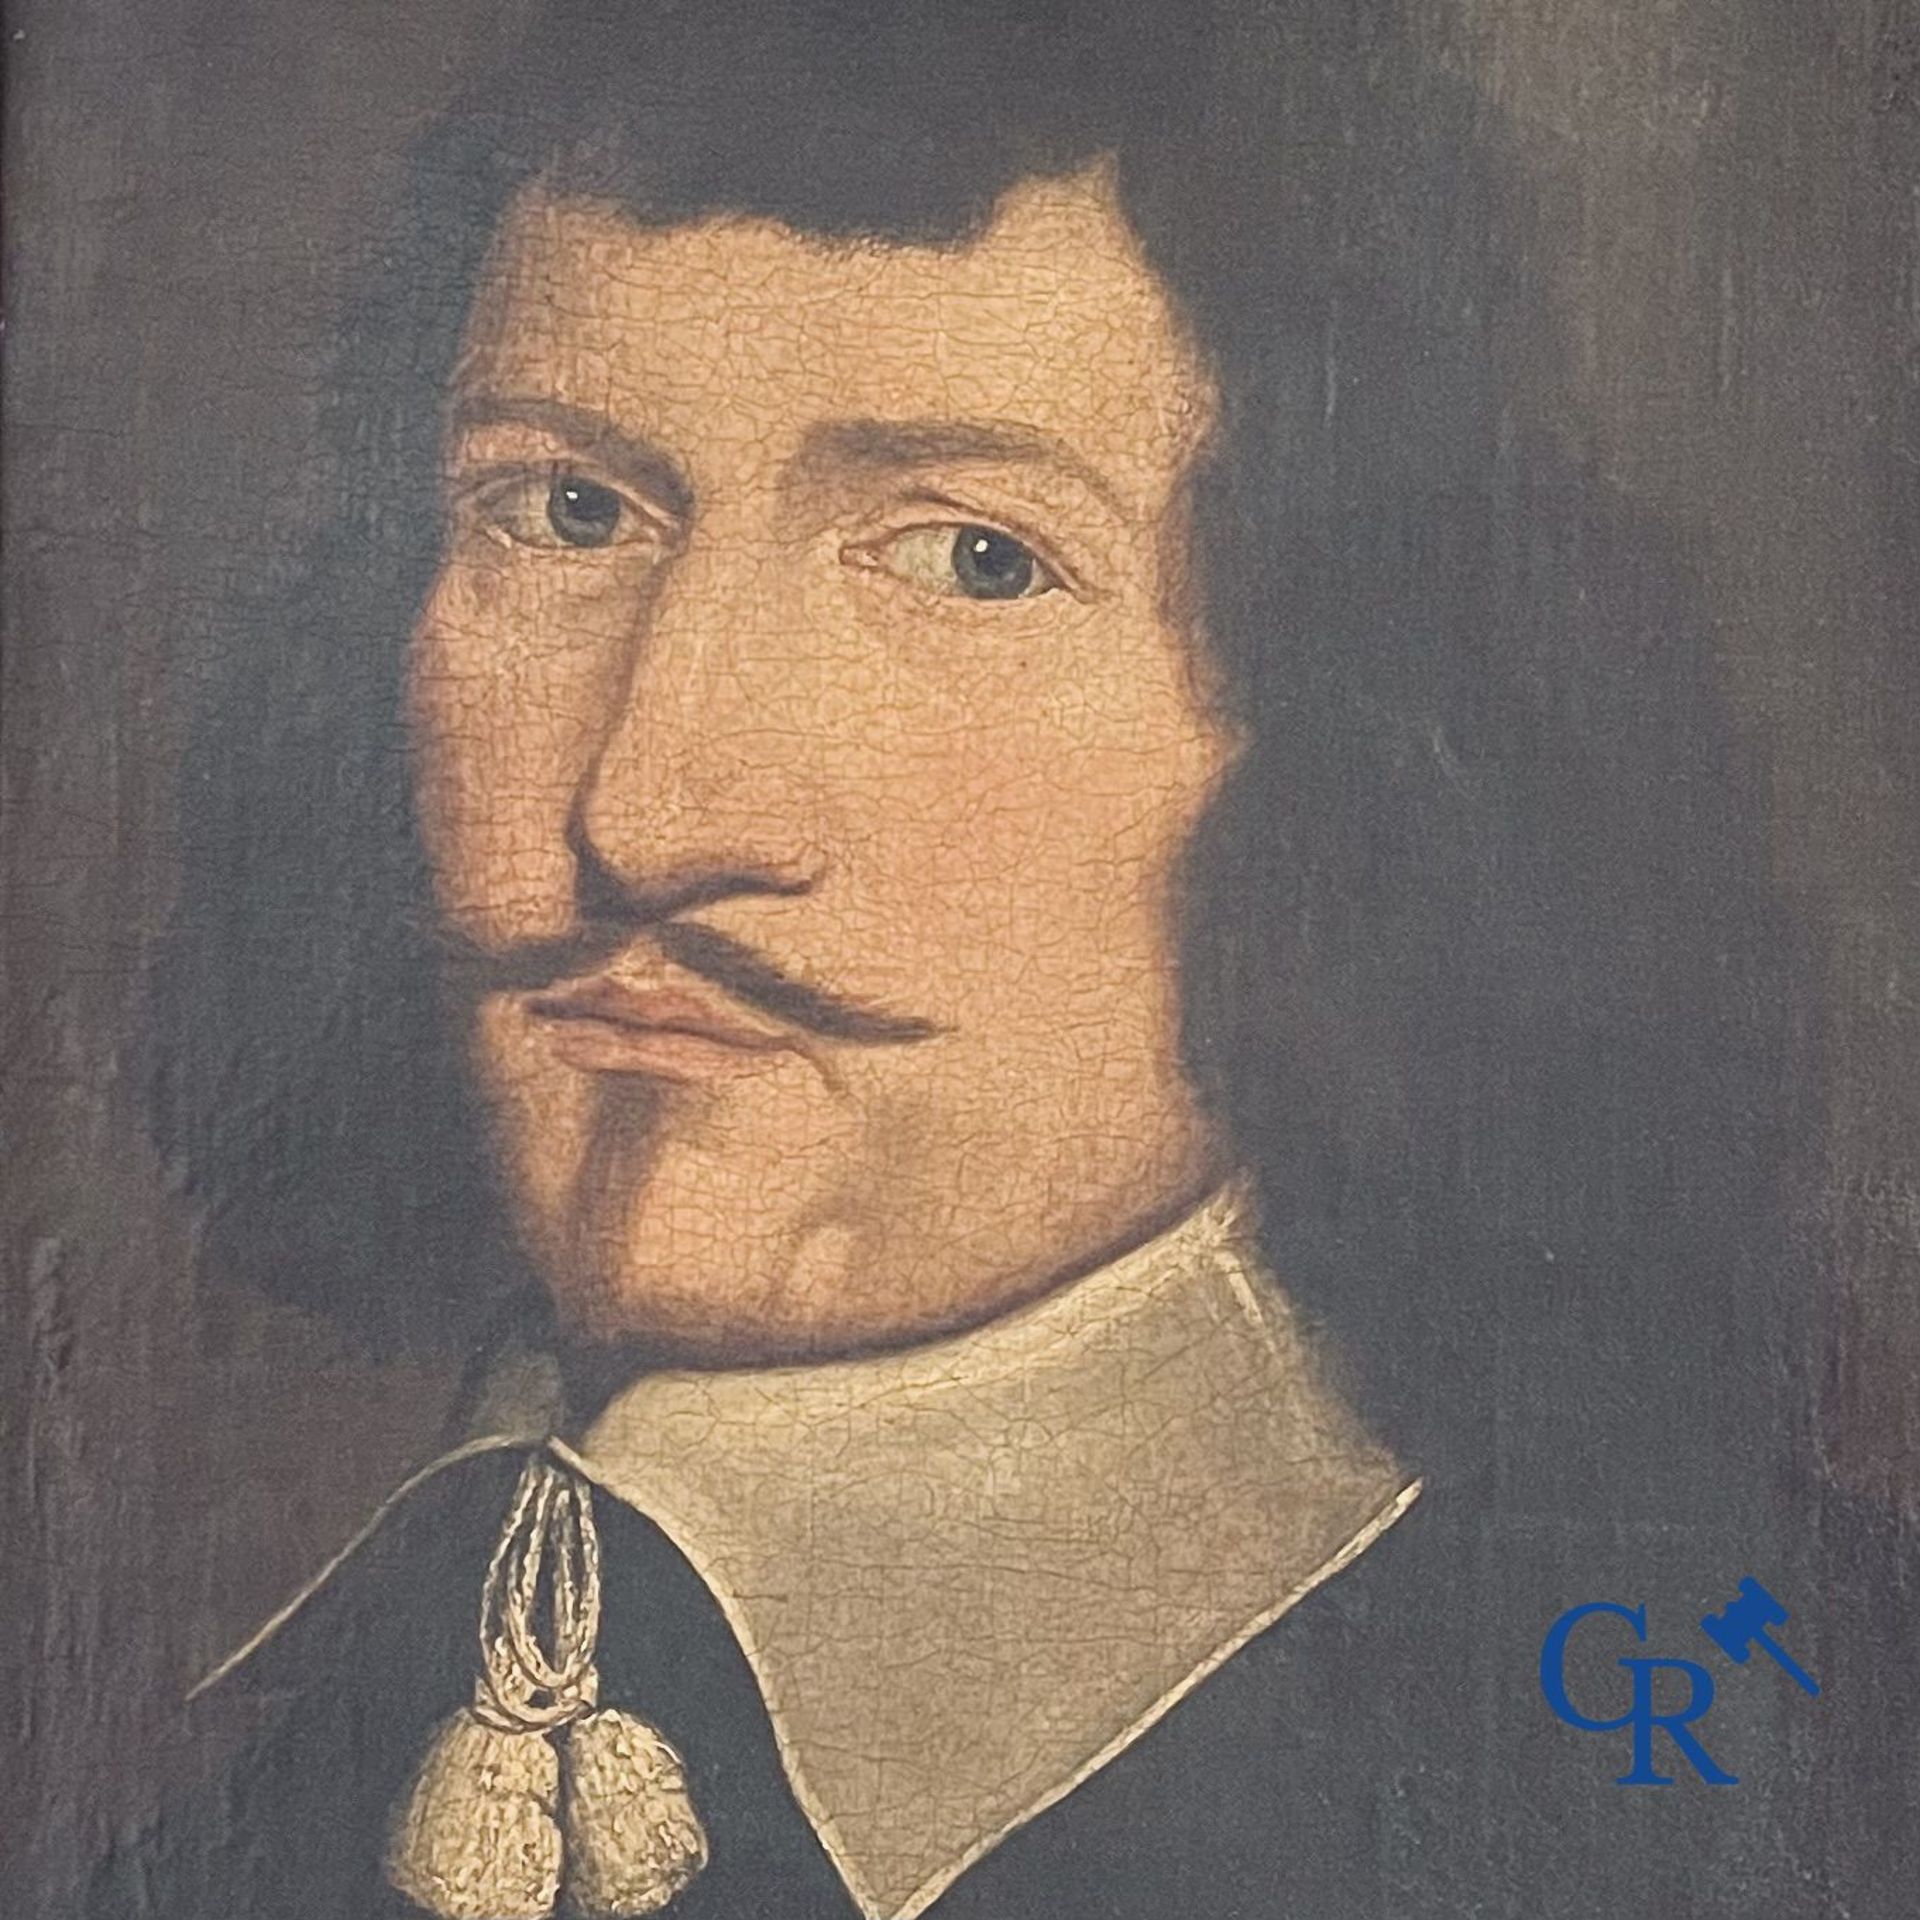 Painting: 17th century portrait painting of a nobleman.